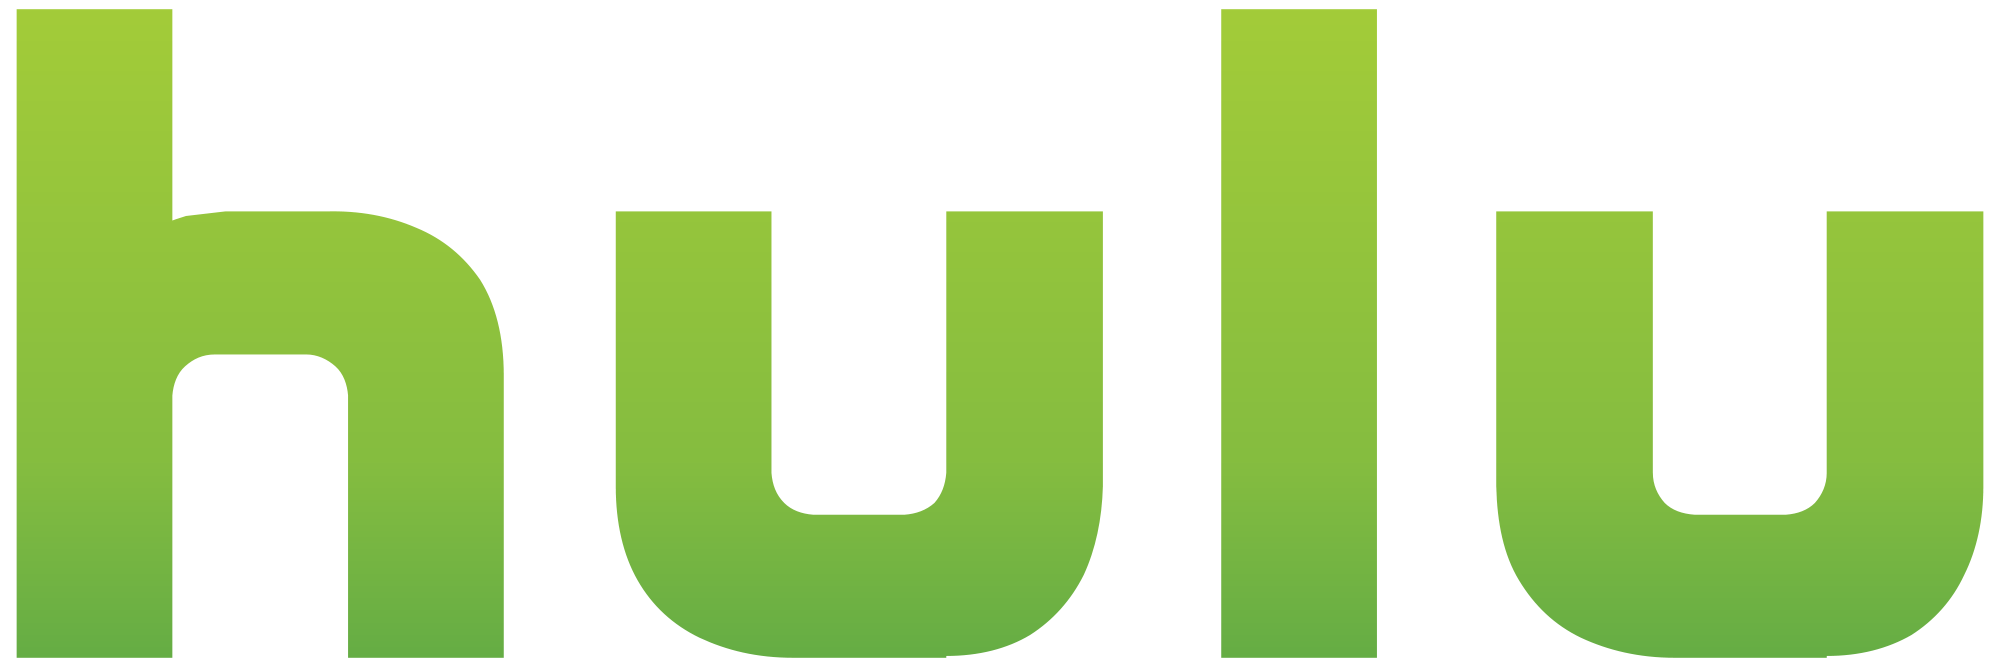 How to watch Hulu outside US